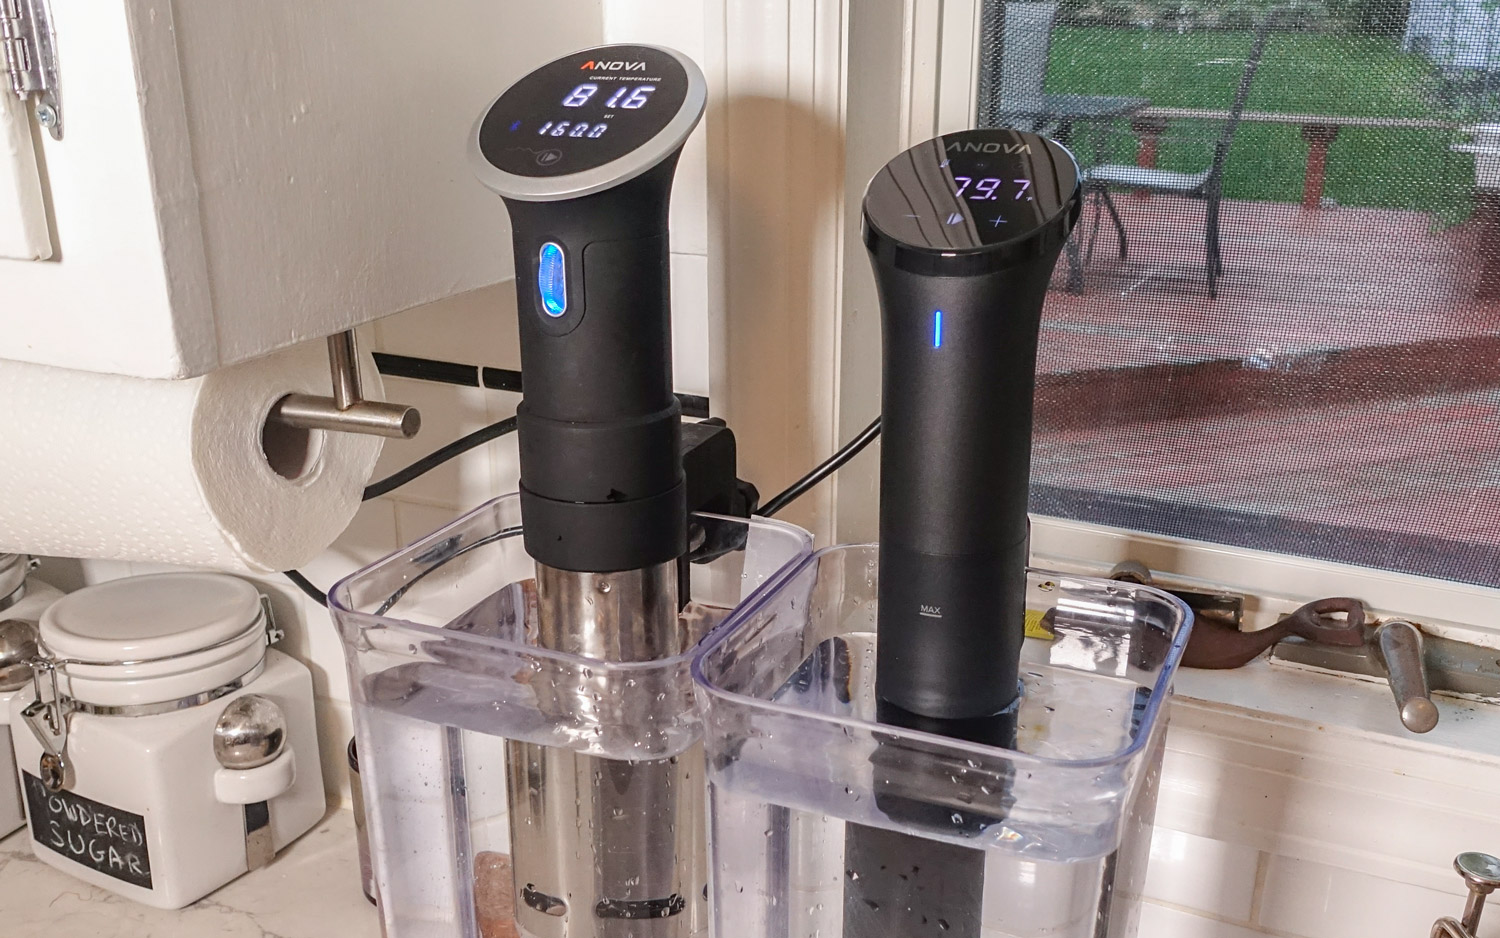 Anova Precision Cooker Nano A Great Introduction to Sous Vide | Tom's Guide